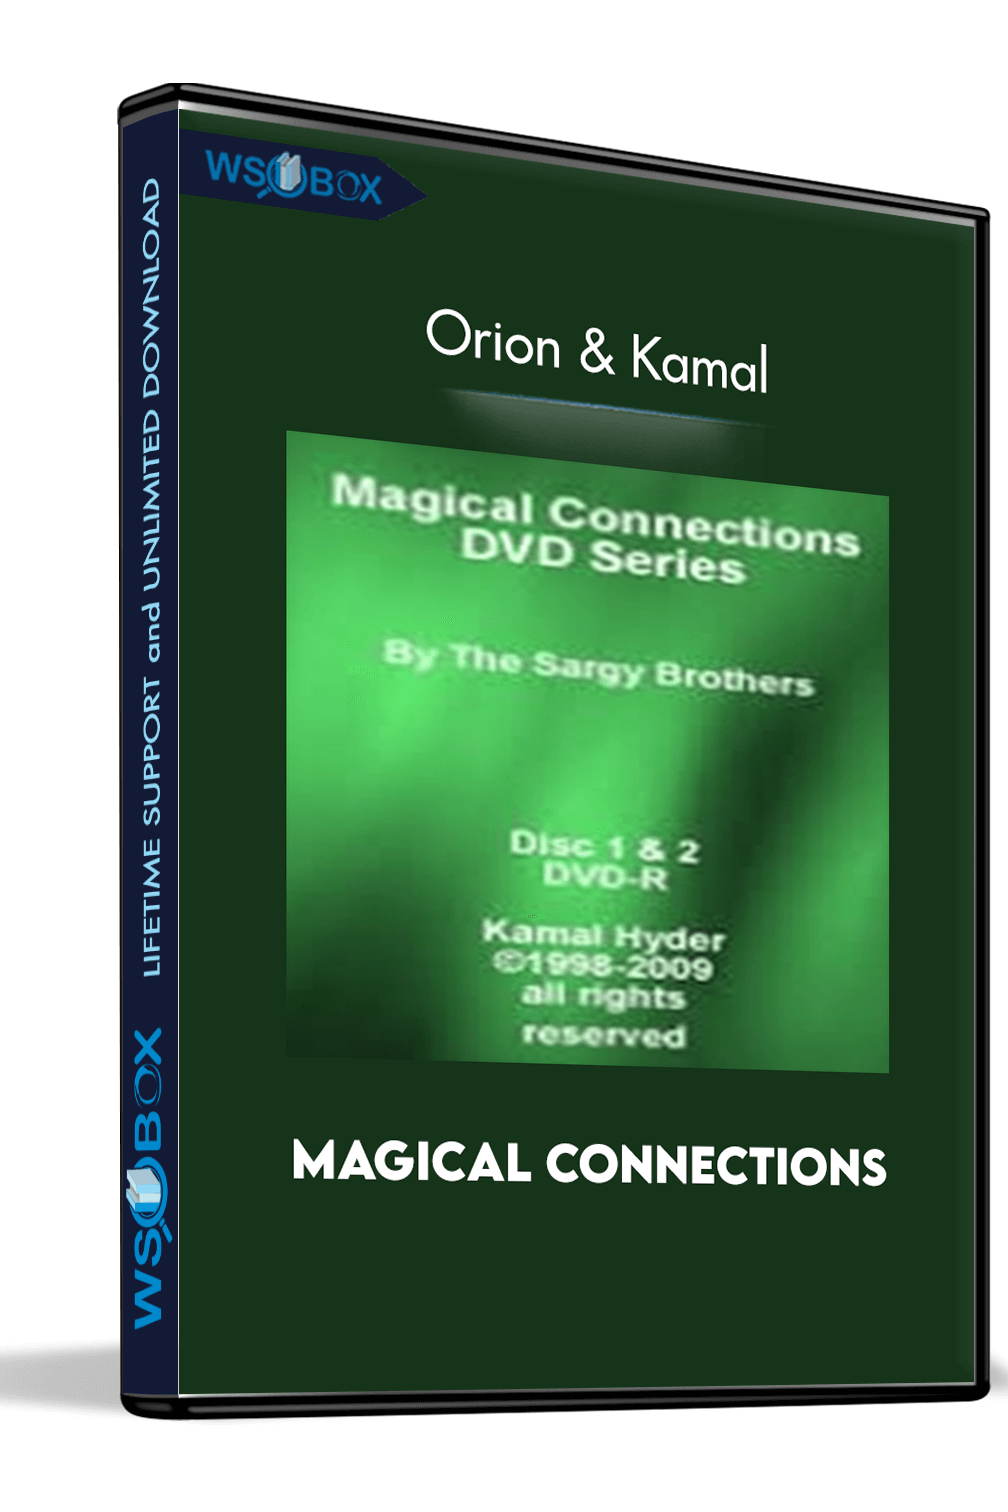 magical-connections-orion-kamal